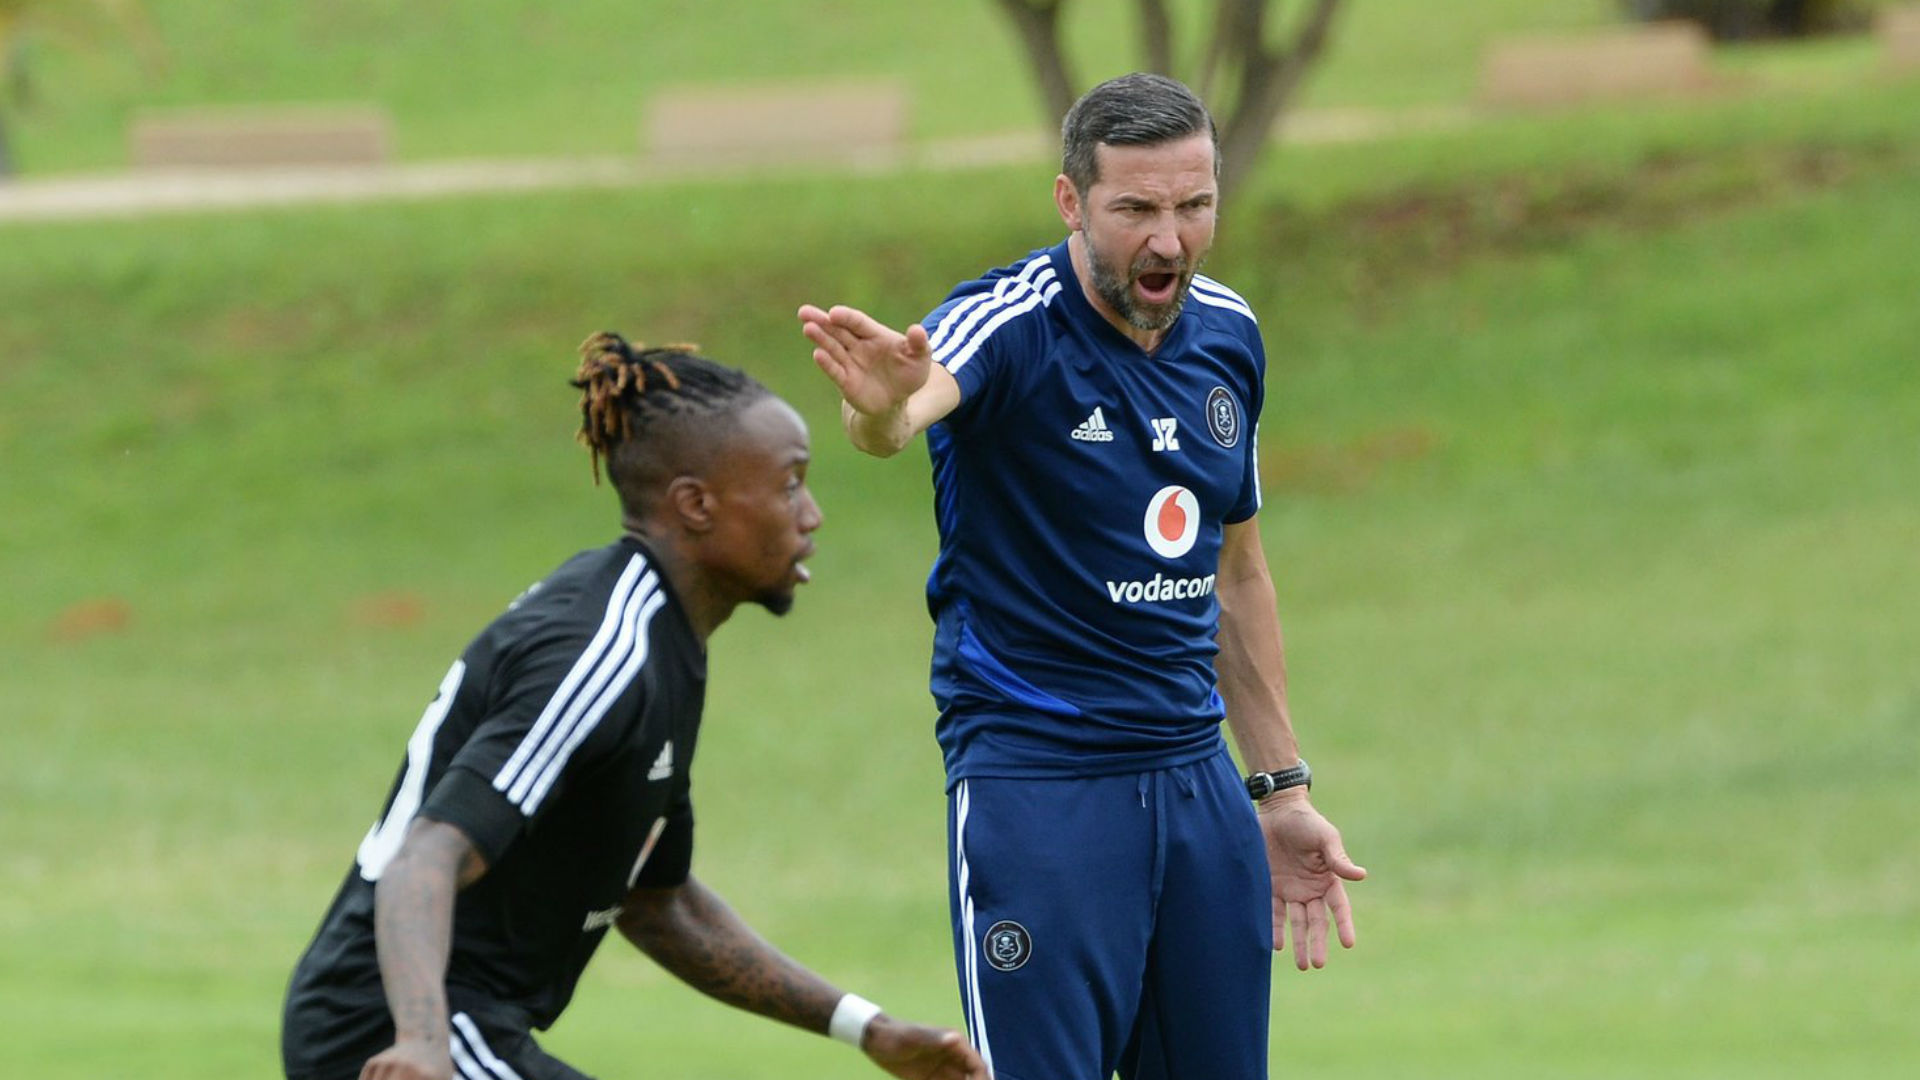 Watch Tau and PSL players' last training session before Christmas